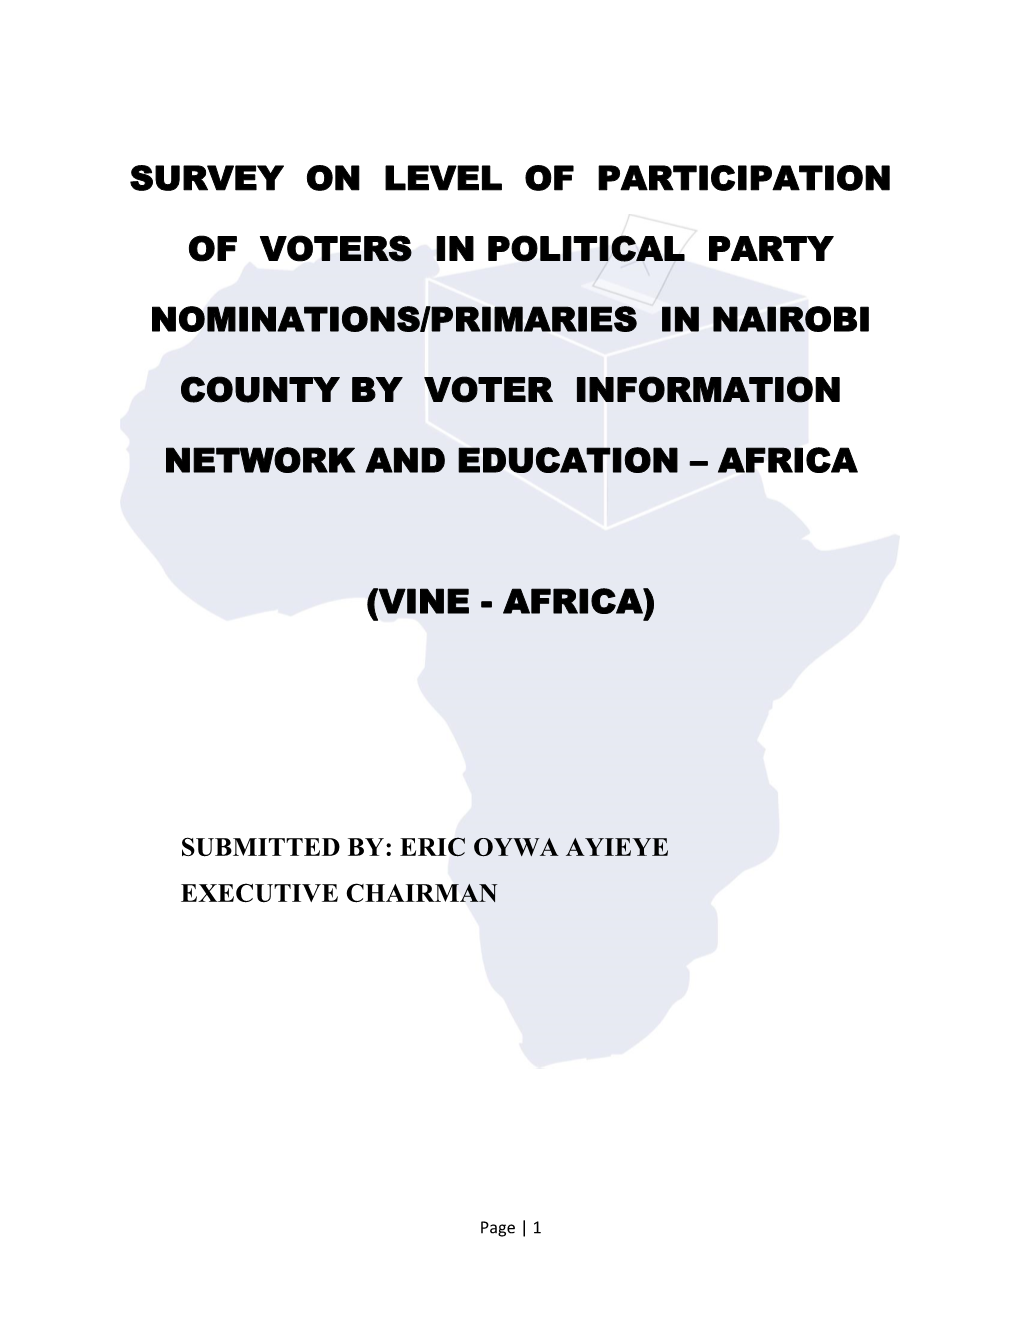 Survey on Level of Participation of Voters in Political Party Primaries/Nominations in Nairobi County